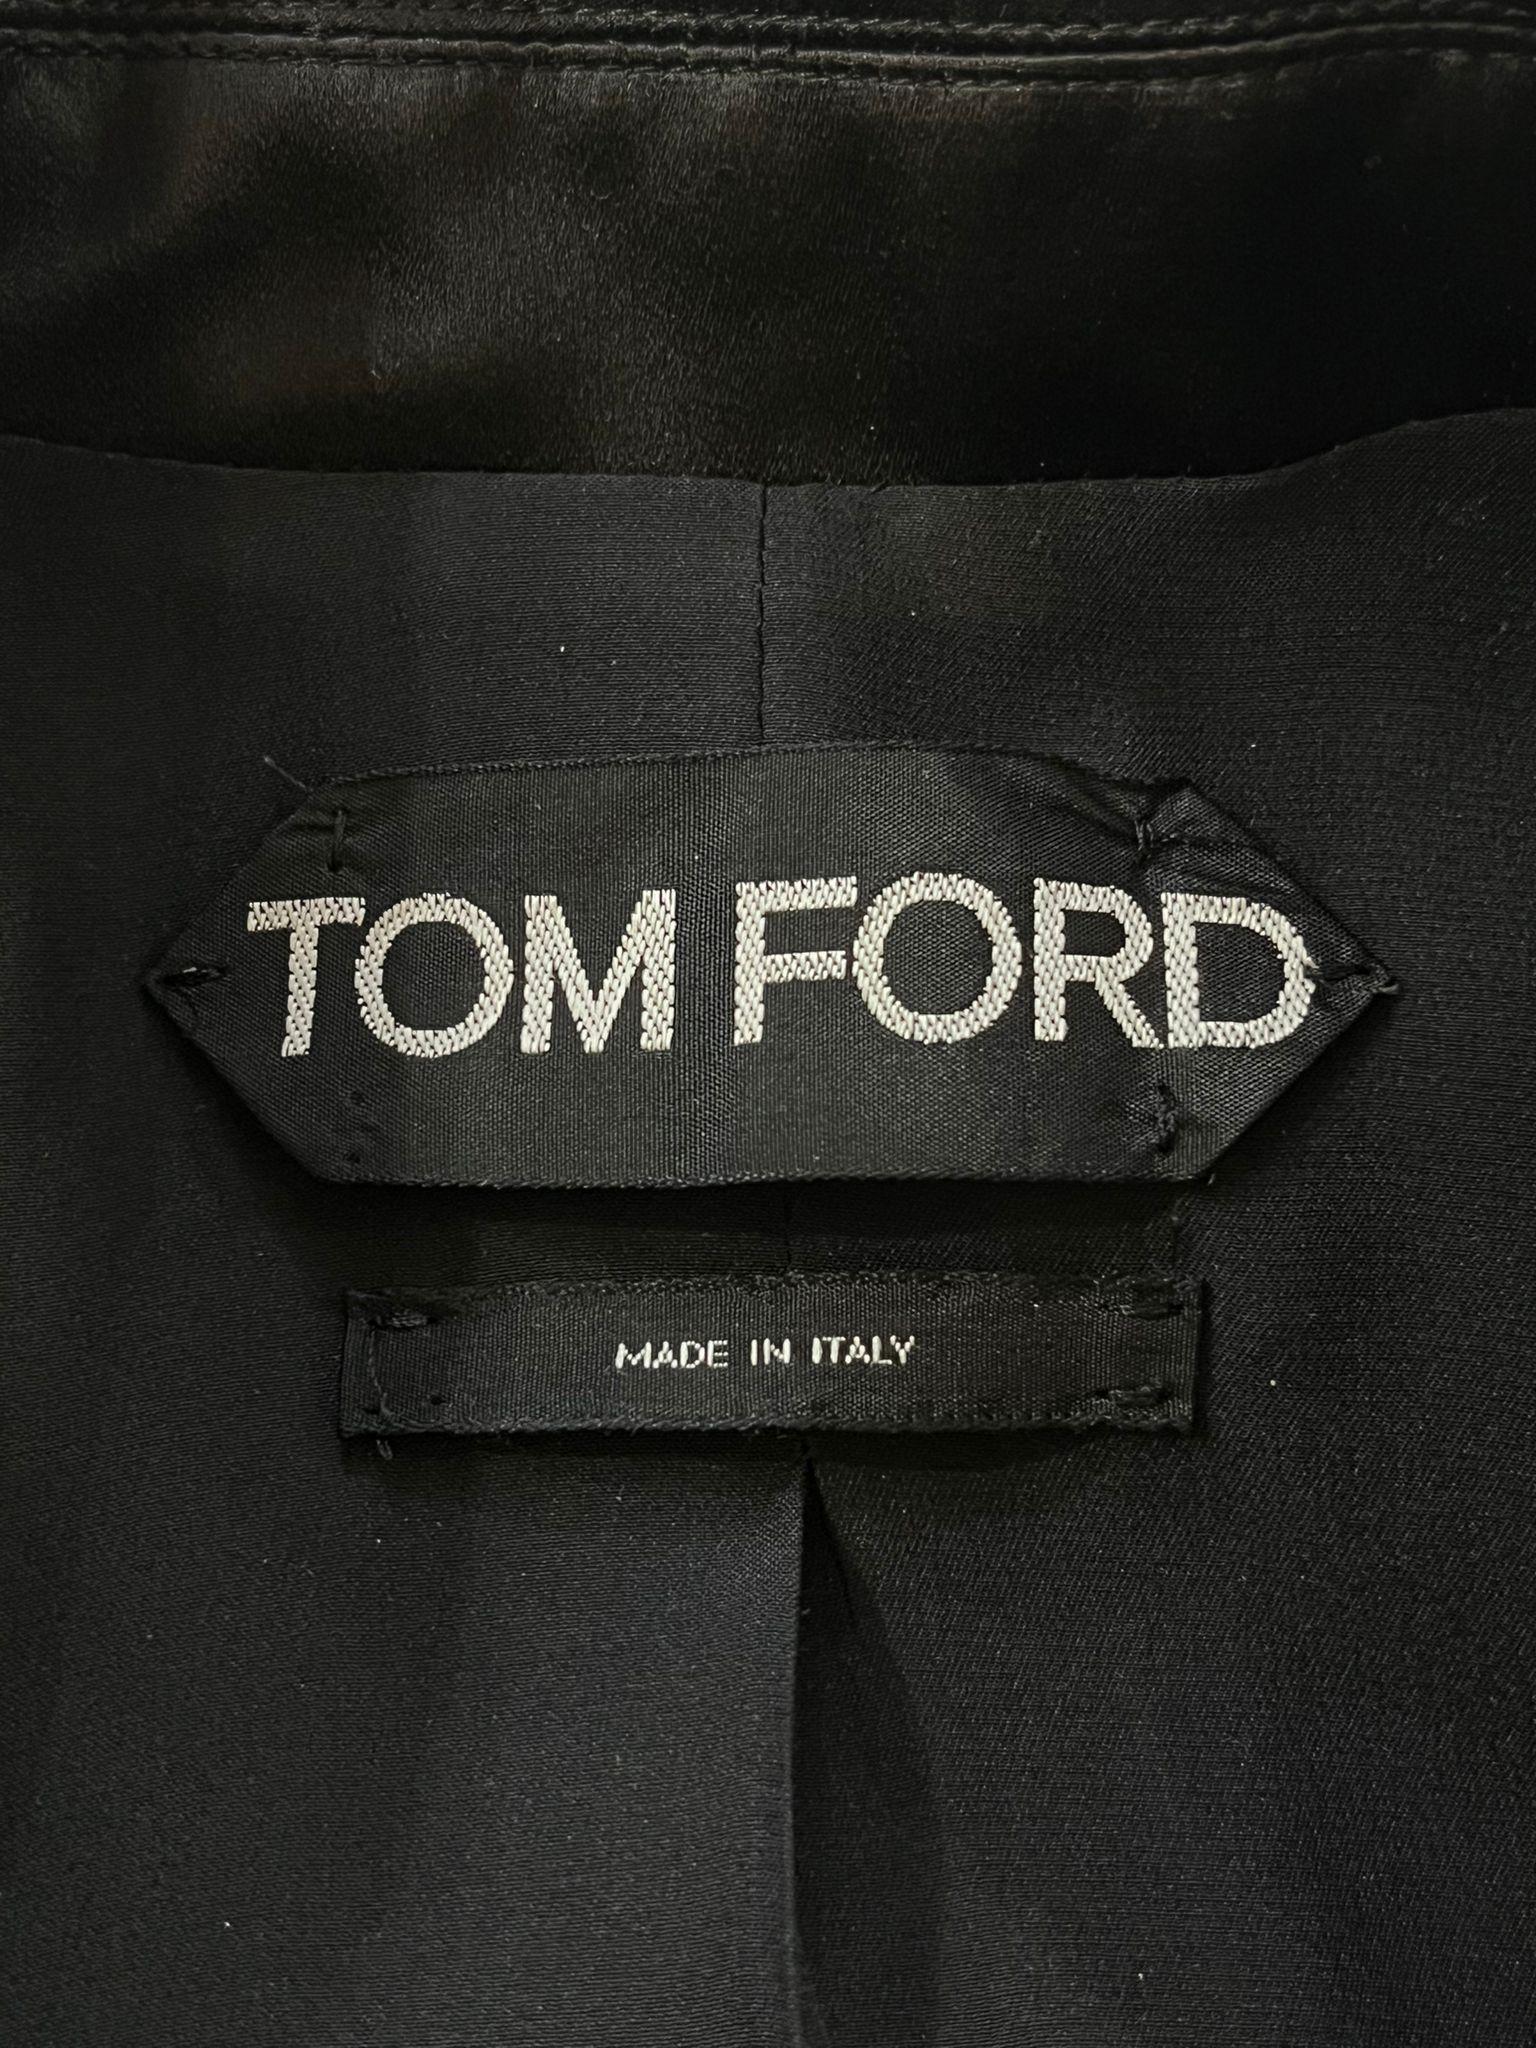 Tom Ford Tailored Two-Piece Suit For Sale 1